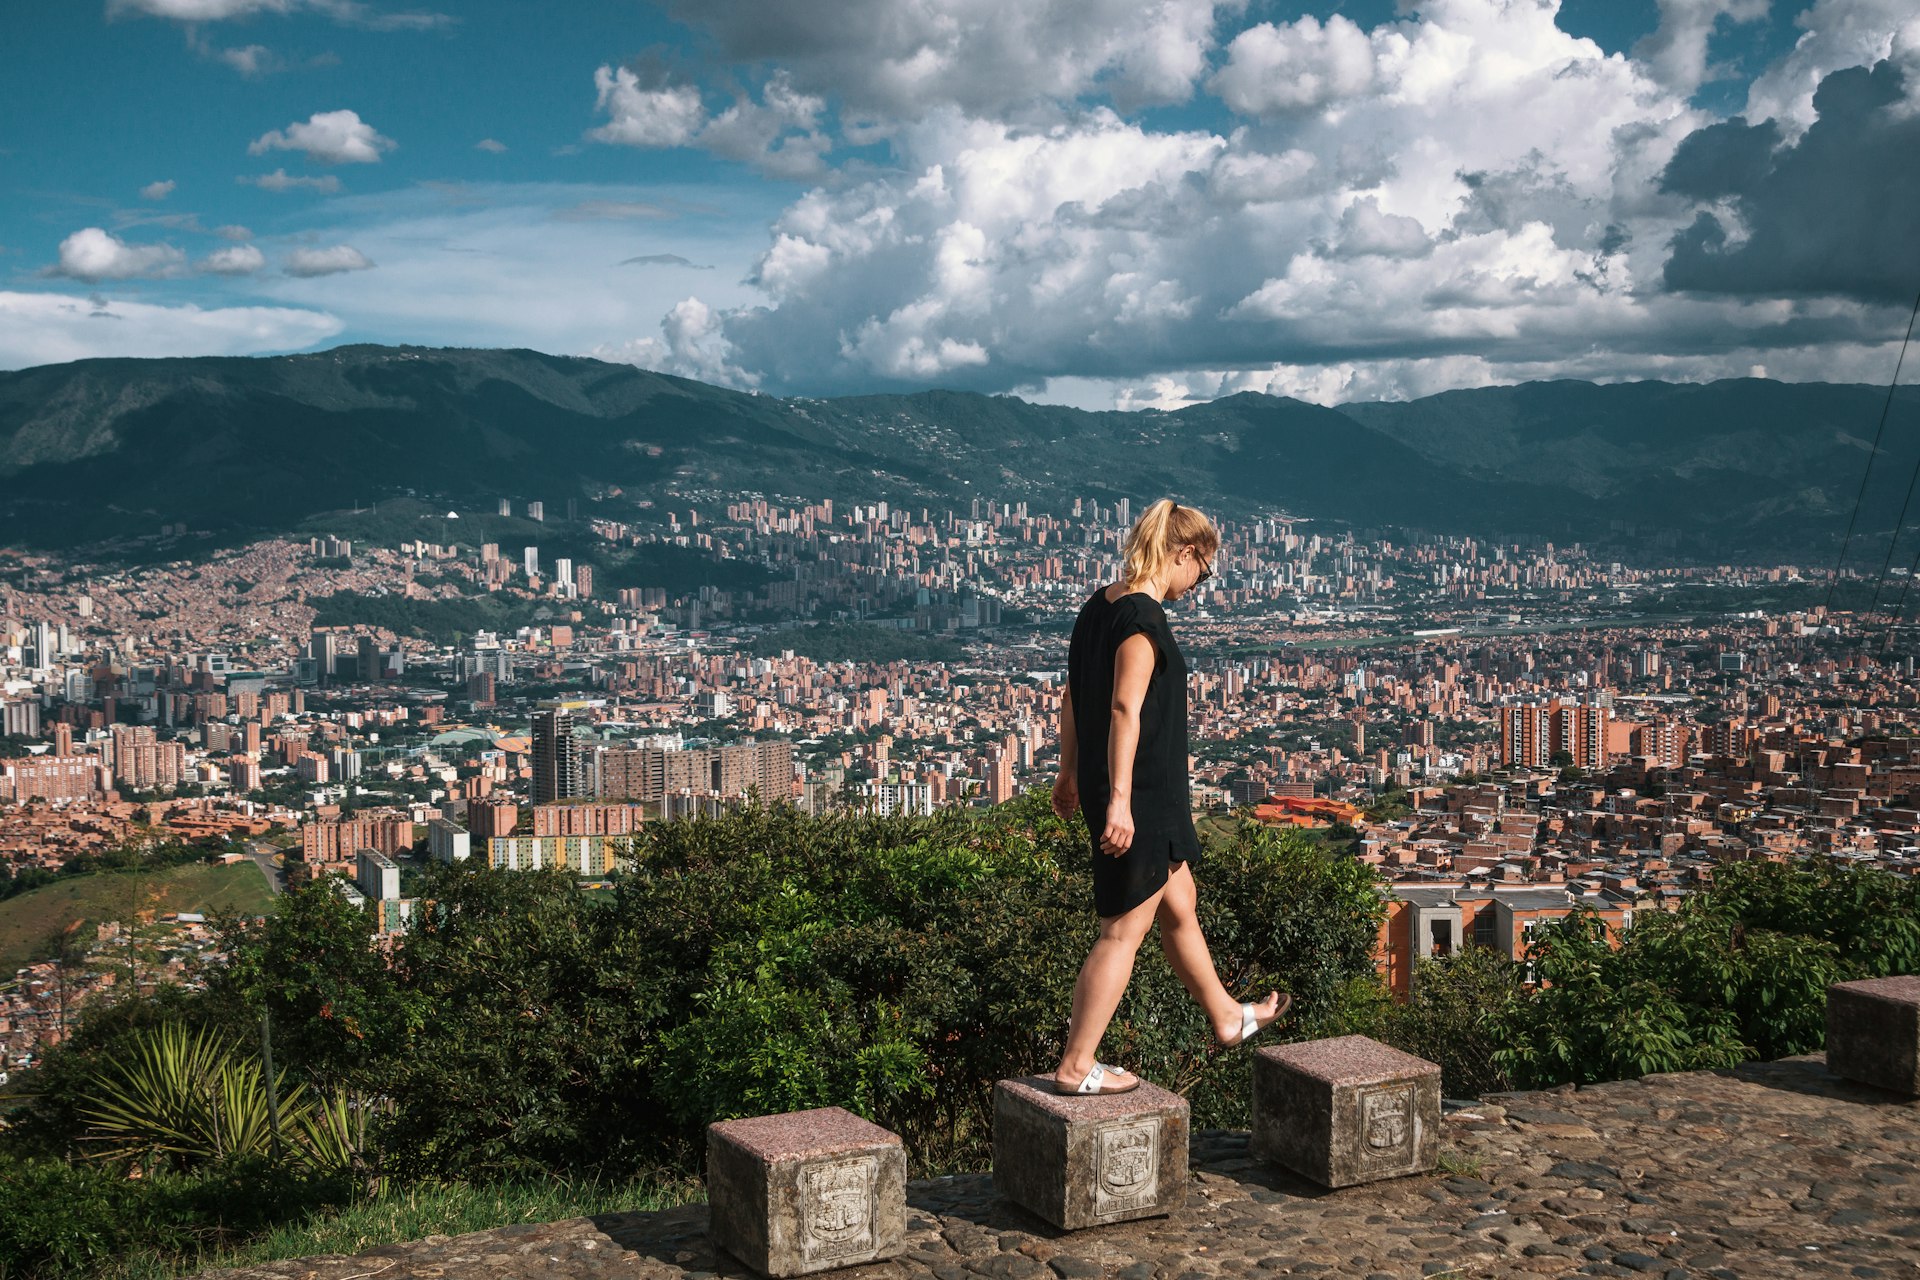 A woman walks on stepping stones at a viewpoint with views over a cityscape